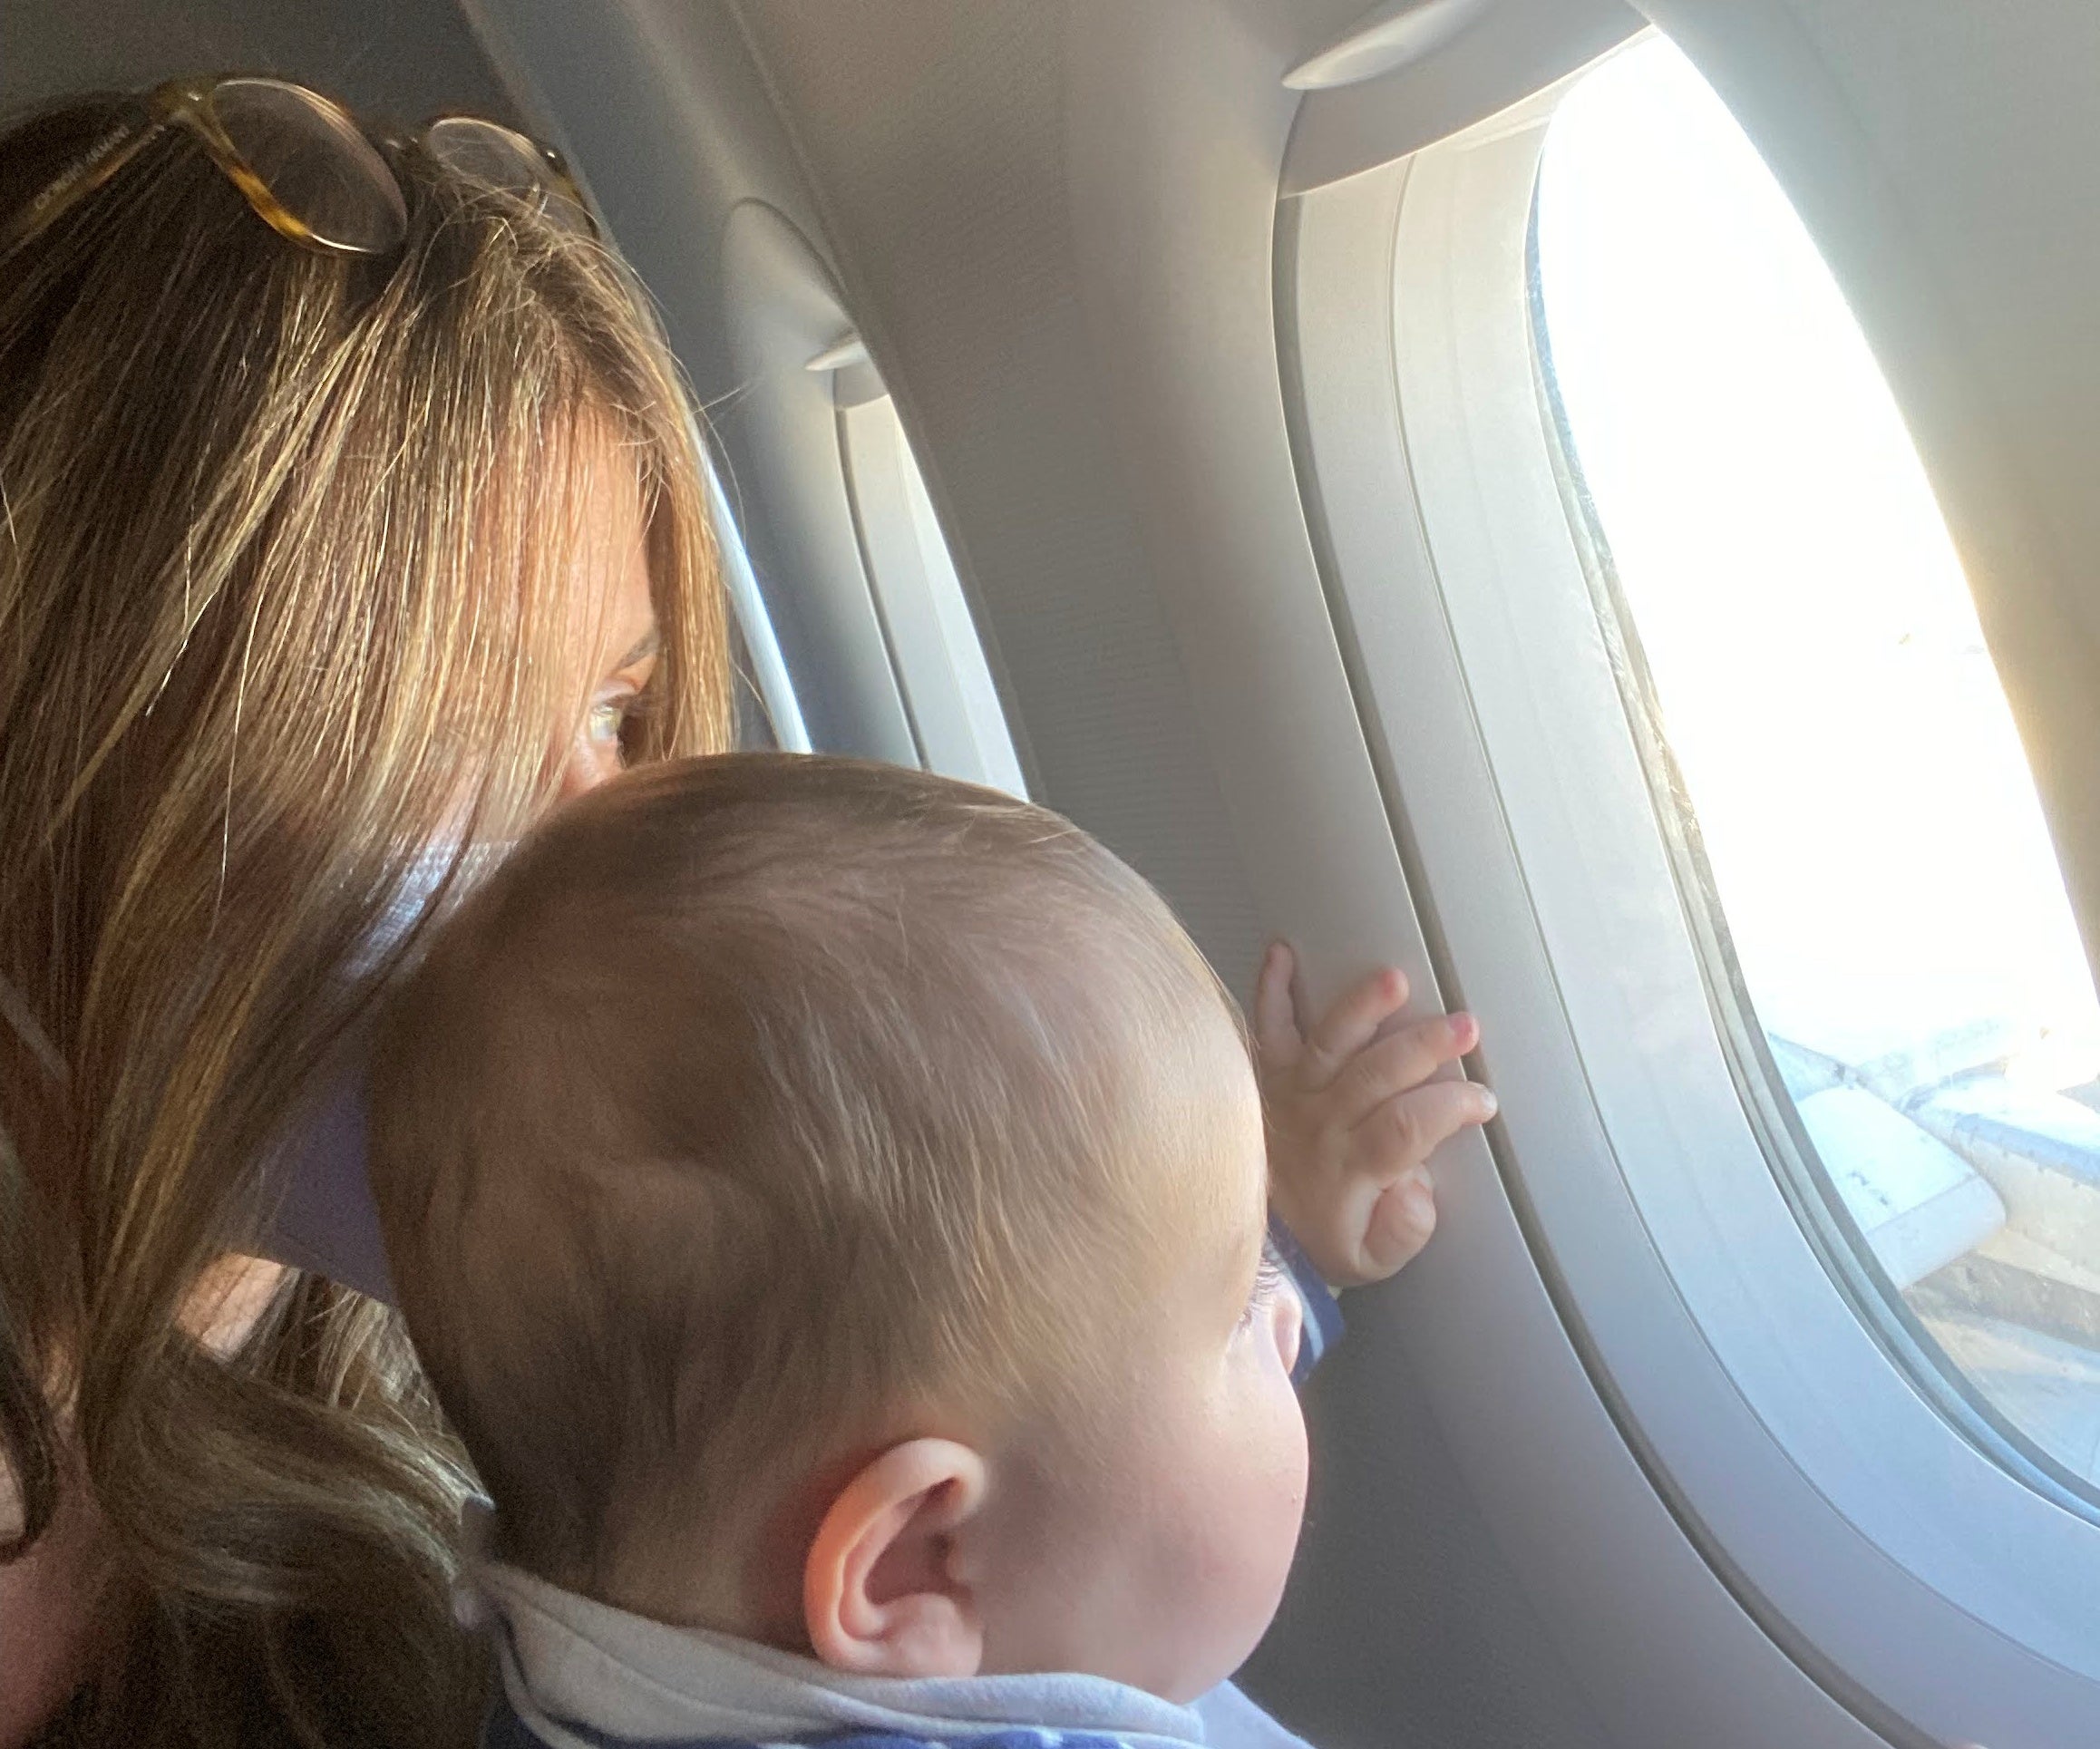 travel 9 hours with a baby